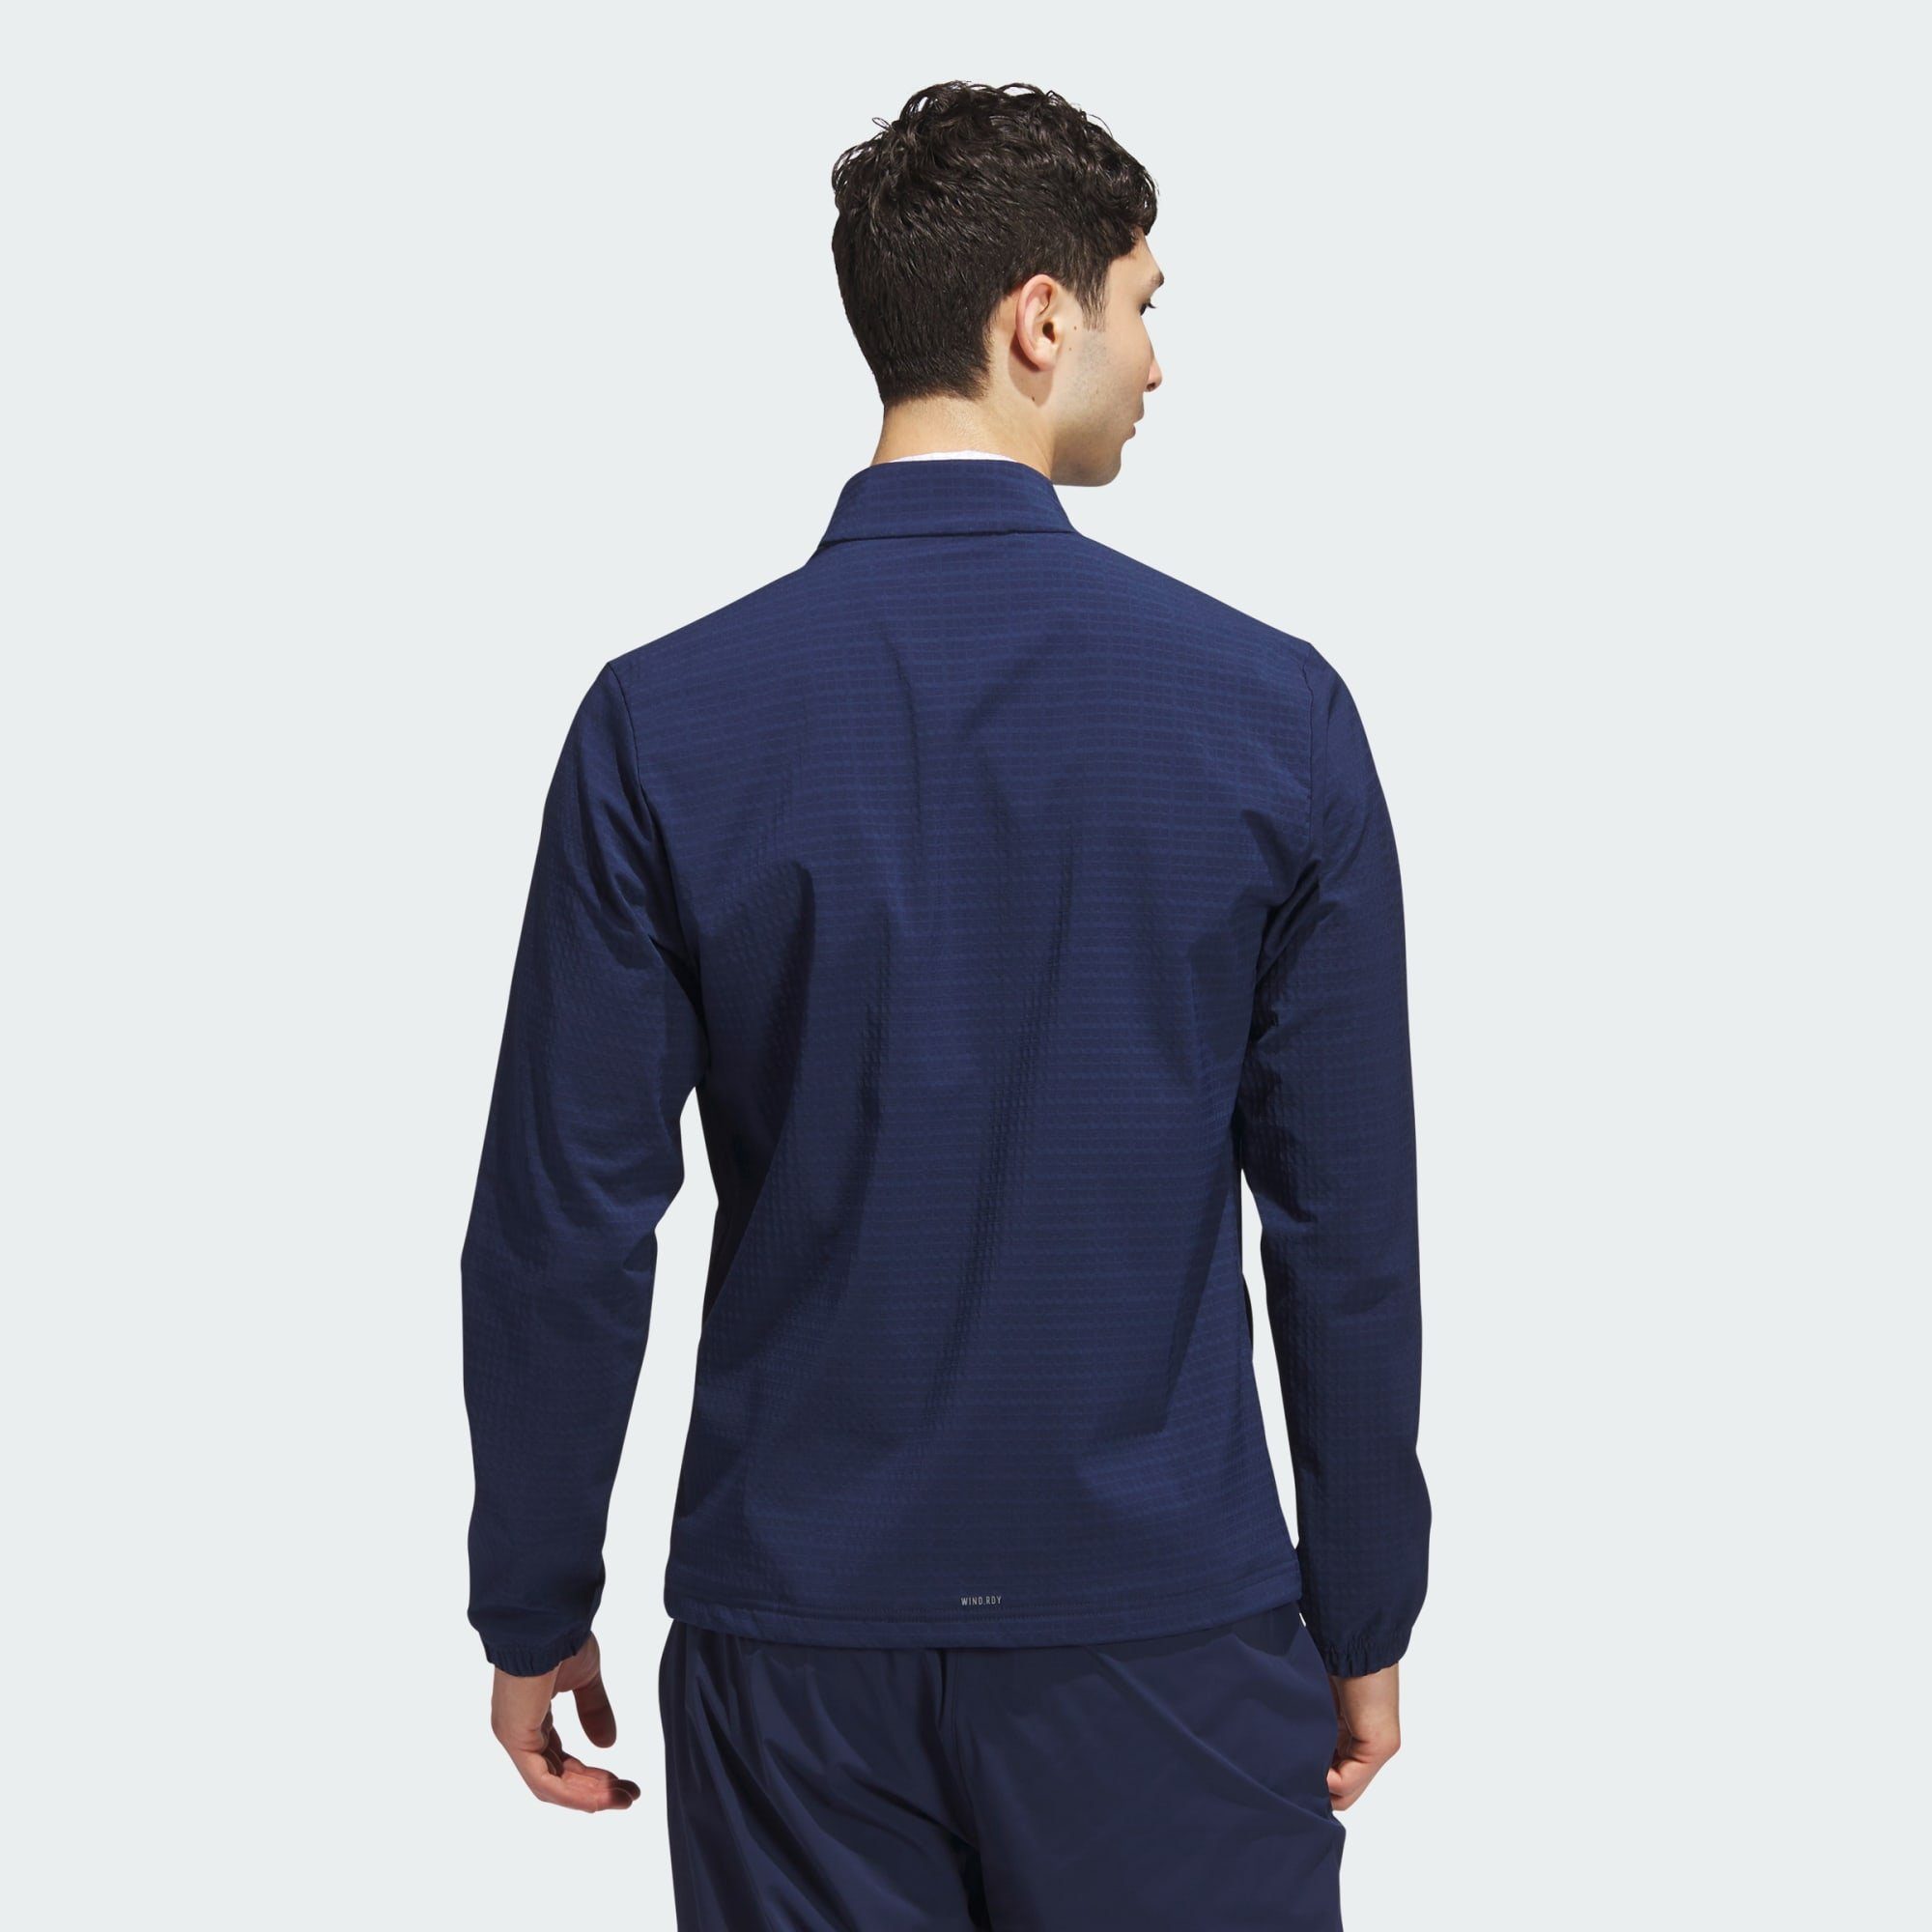 ULTIMATE365 PULLOVER WIND.RDY Funktionsjacke TOUR Performance adidas HALF-ZIP